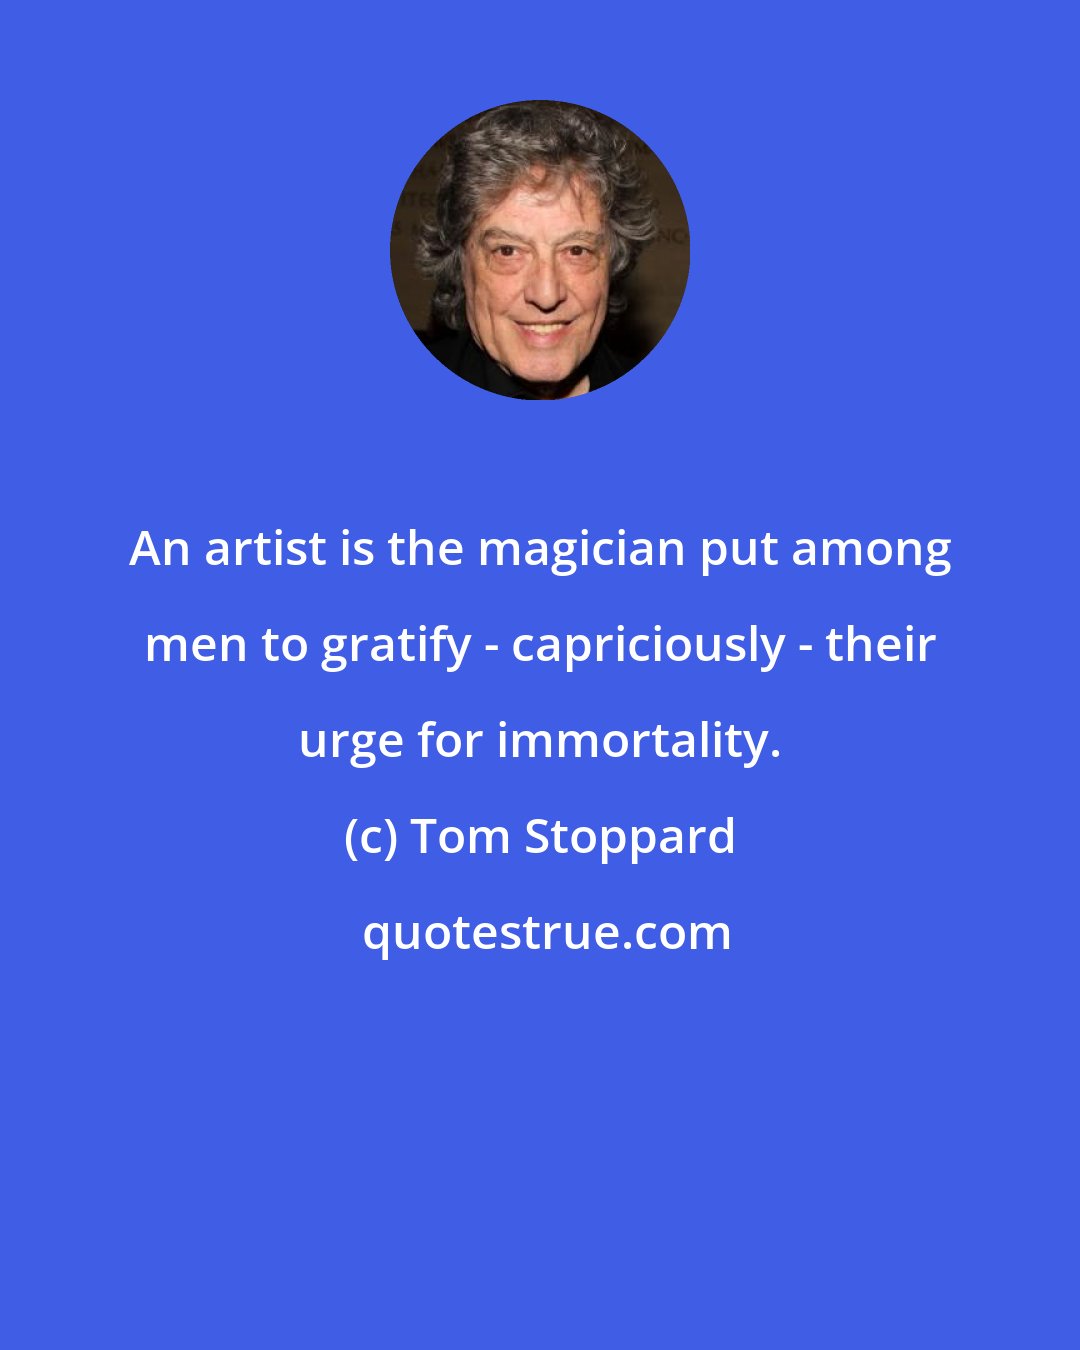 Tom Stoppard: An artist is the magician put among men to gratify - capriciously - their urge for immortality.